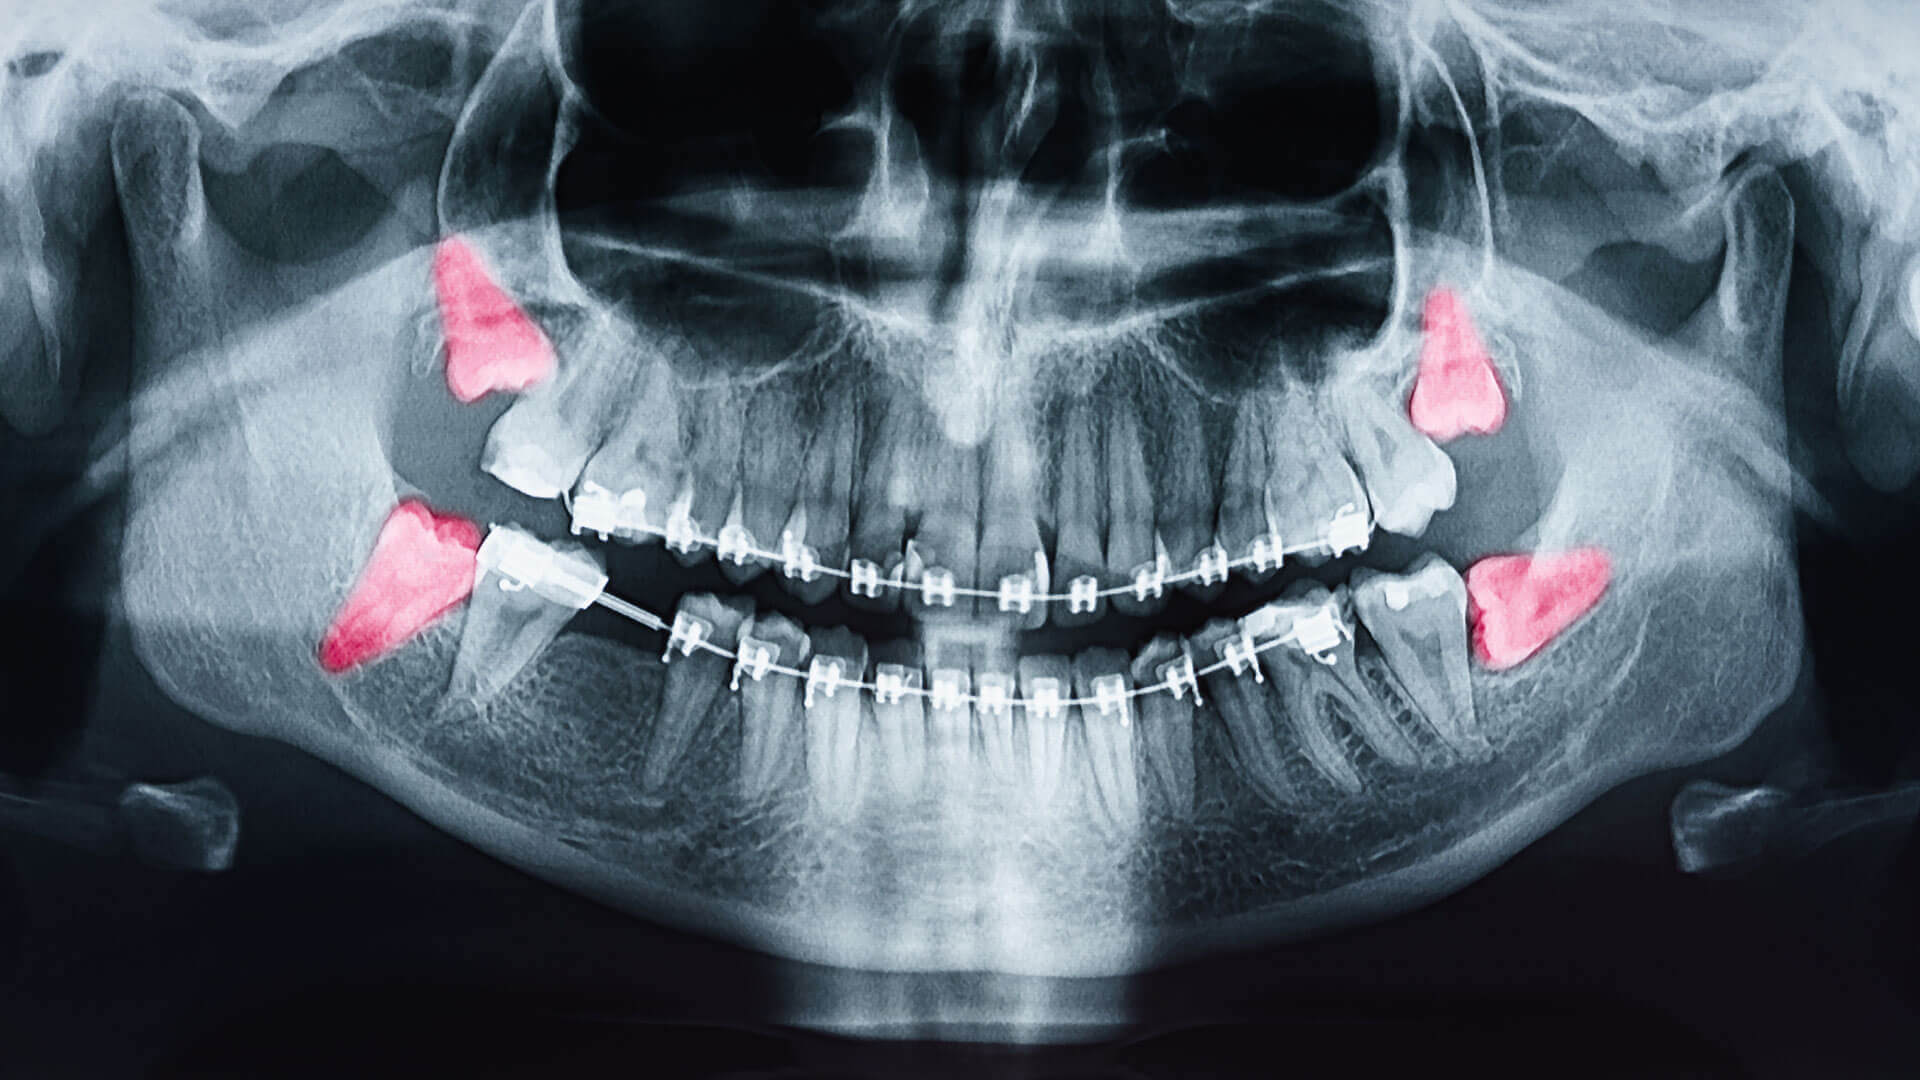 How to Know if Your Wisdom Teeth Need to be Removed